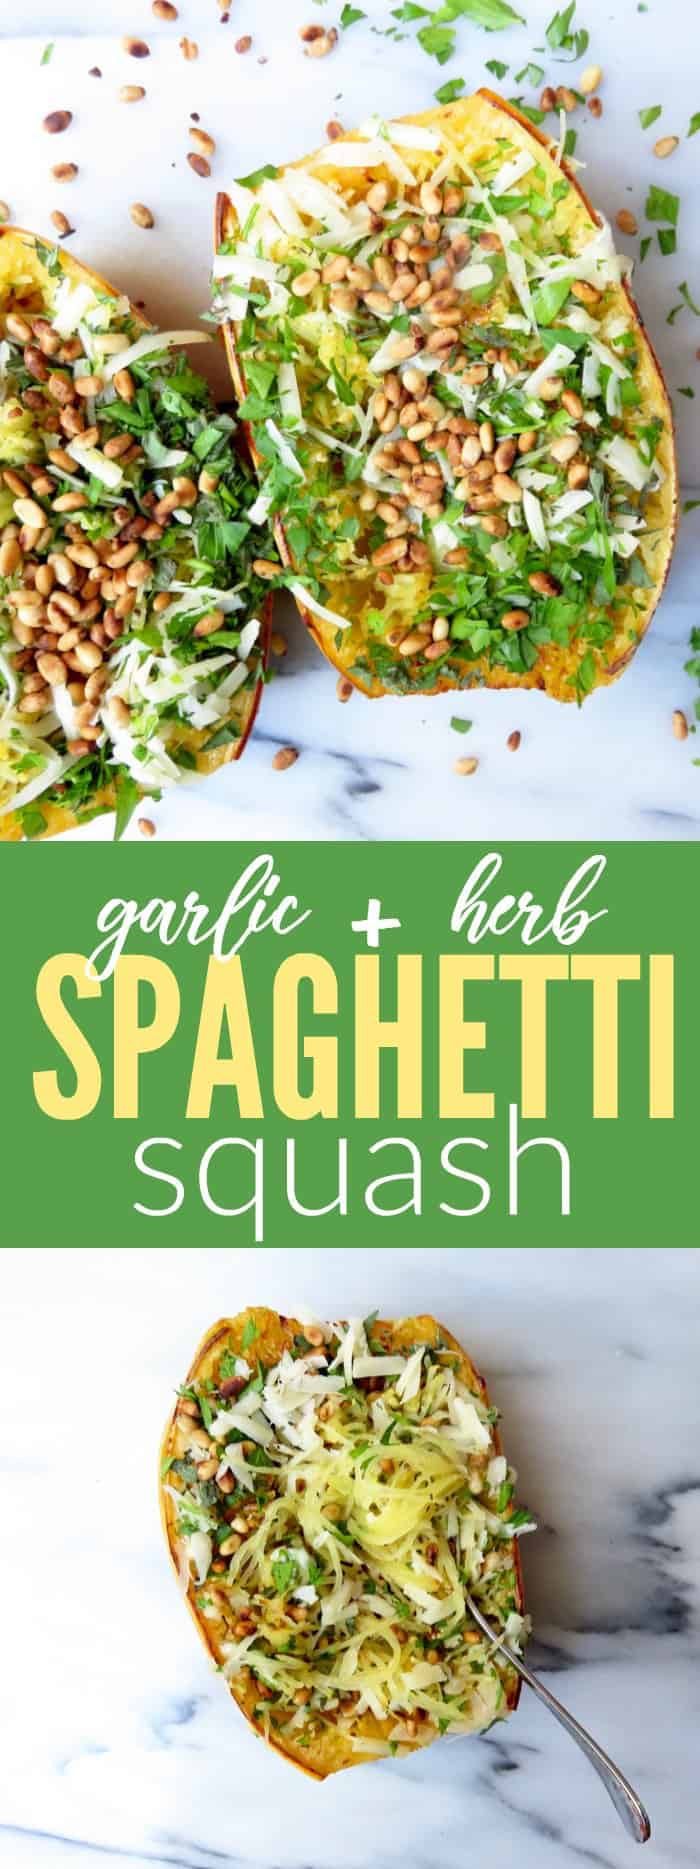 Really tasty low carb + gluten free Garlic + Herb Spaghetti Squash recipe that is so easy to make and filling!! I love how light and flavorful it is! thetoastedpinenut.com